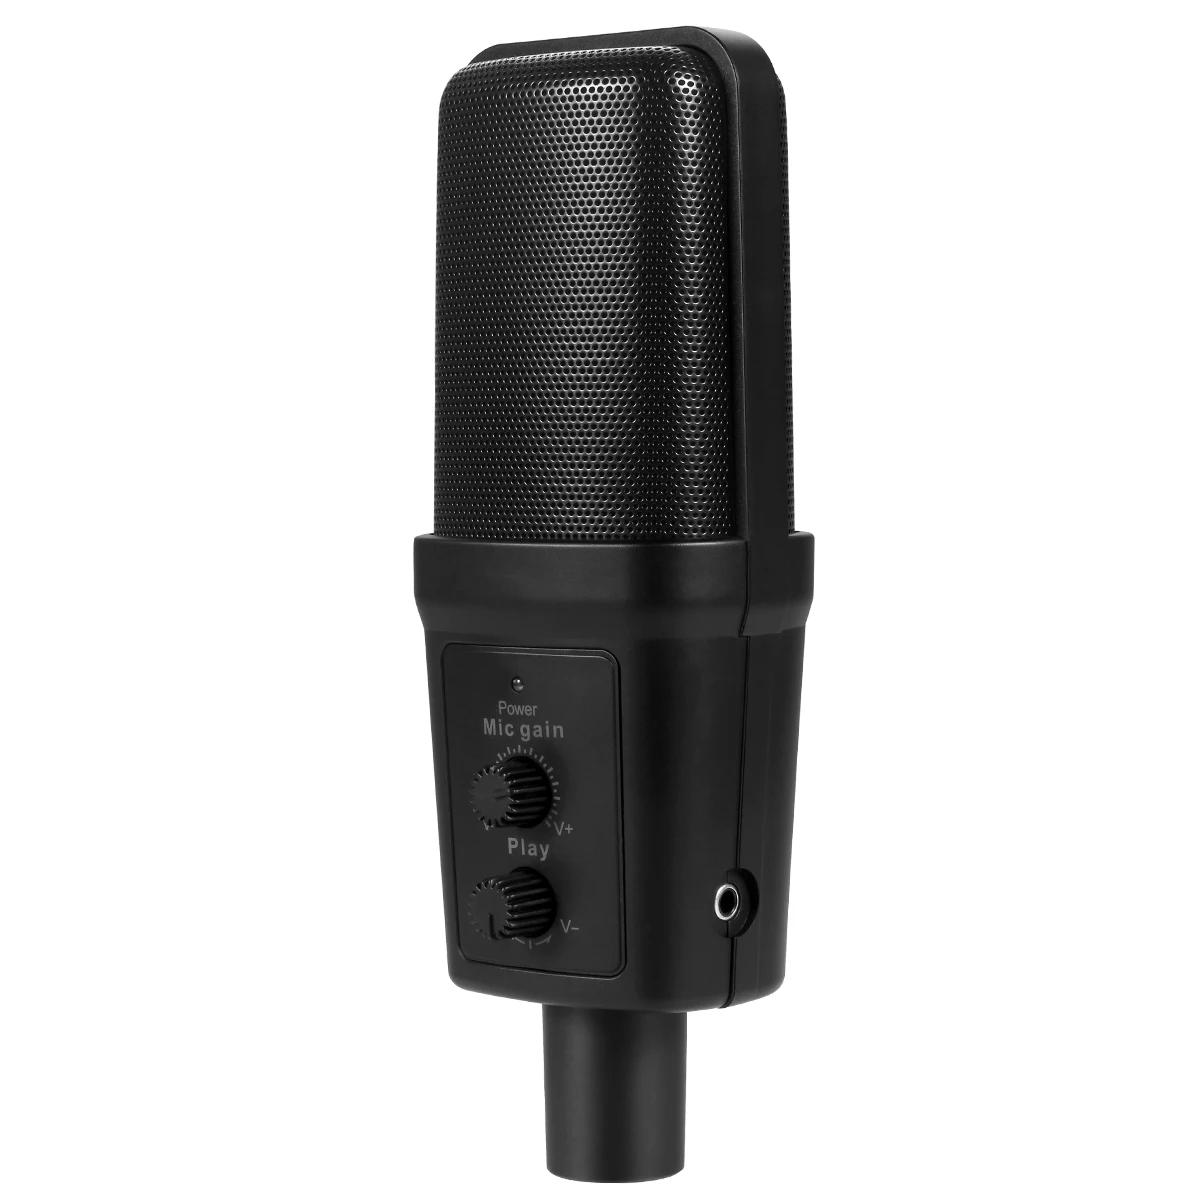 SF-970 Professional Studio Microphone for Podcasting Recording Gaming USB Microphone with Volume Control and Headphone Interface